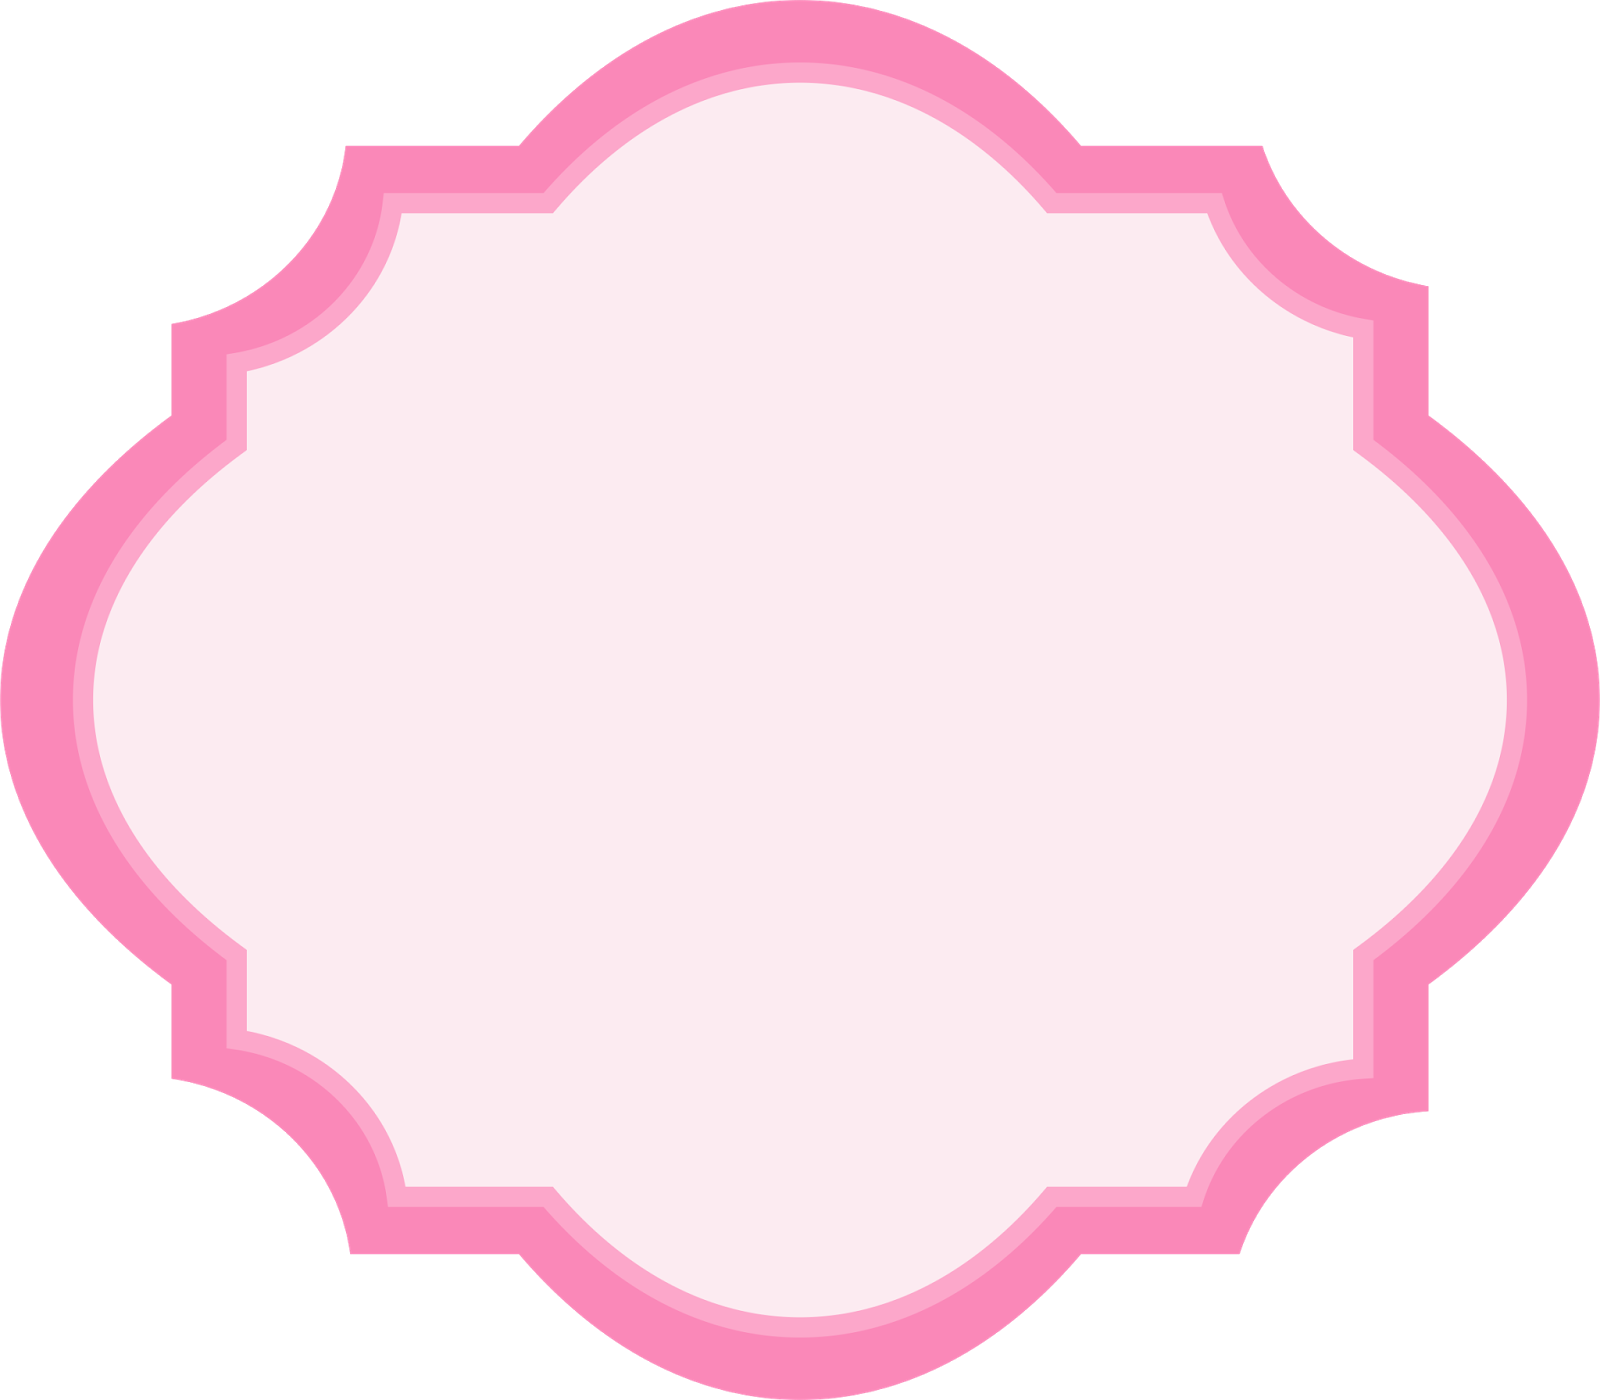 A Pink And White Frame